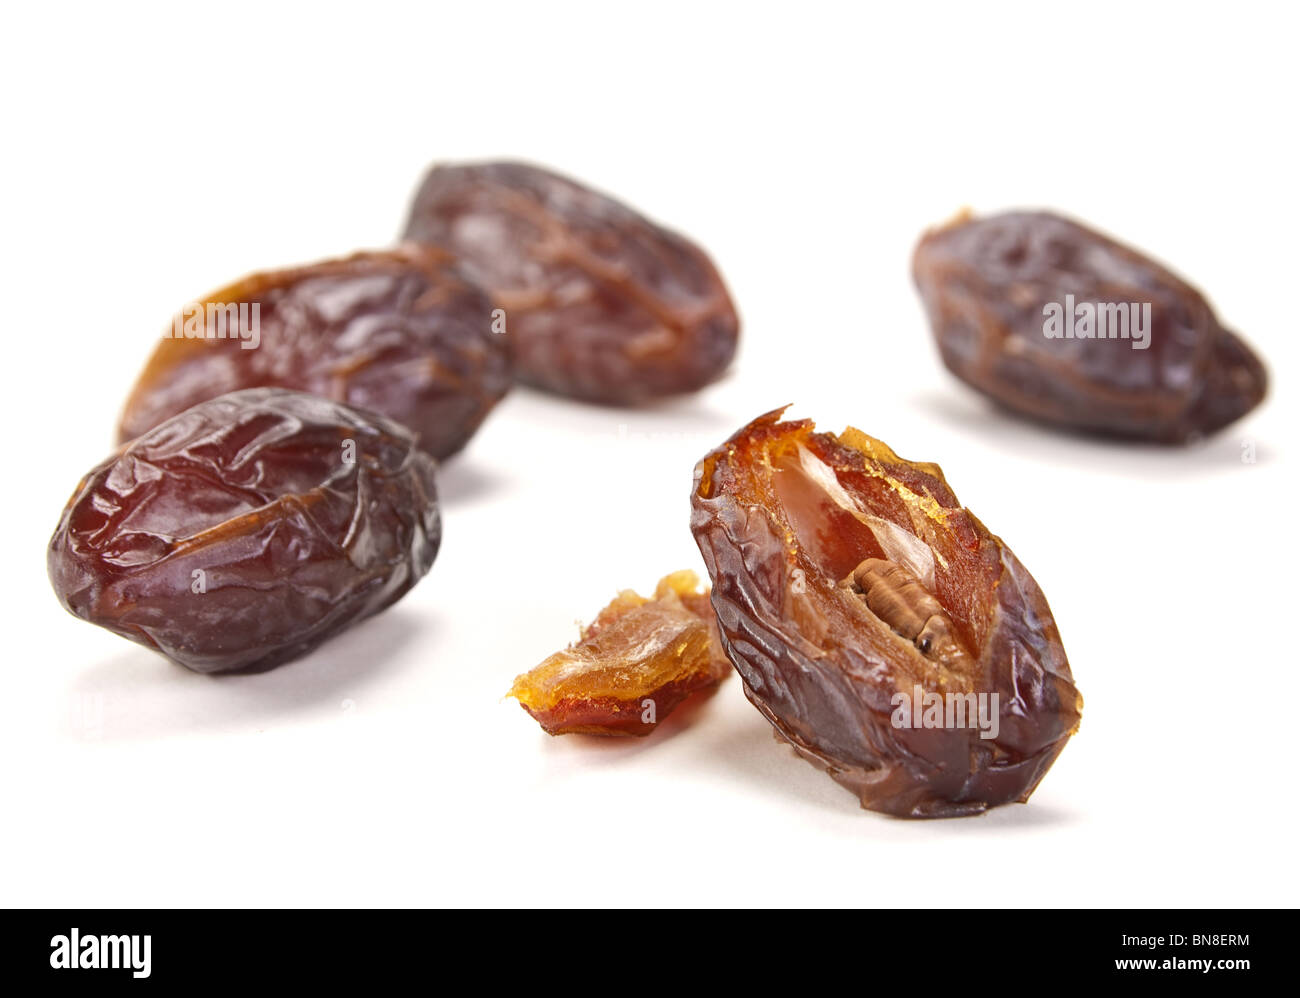 Dry date fruit group isolated on white background Stock Photo